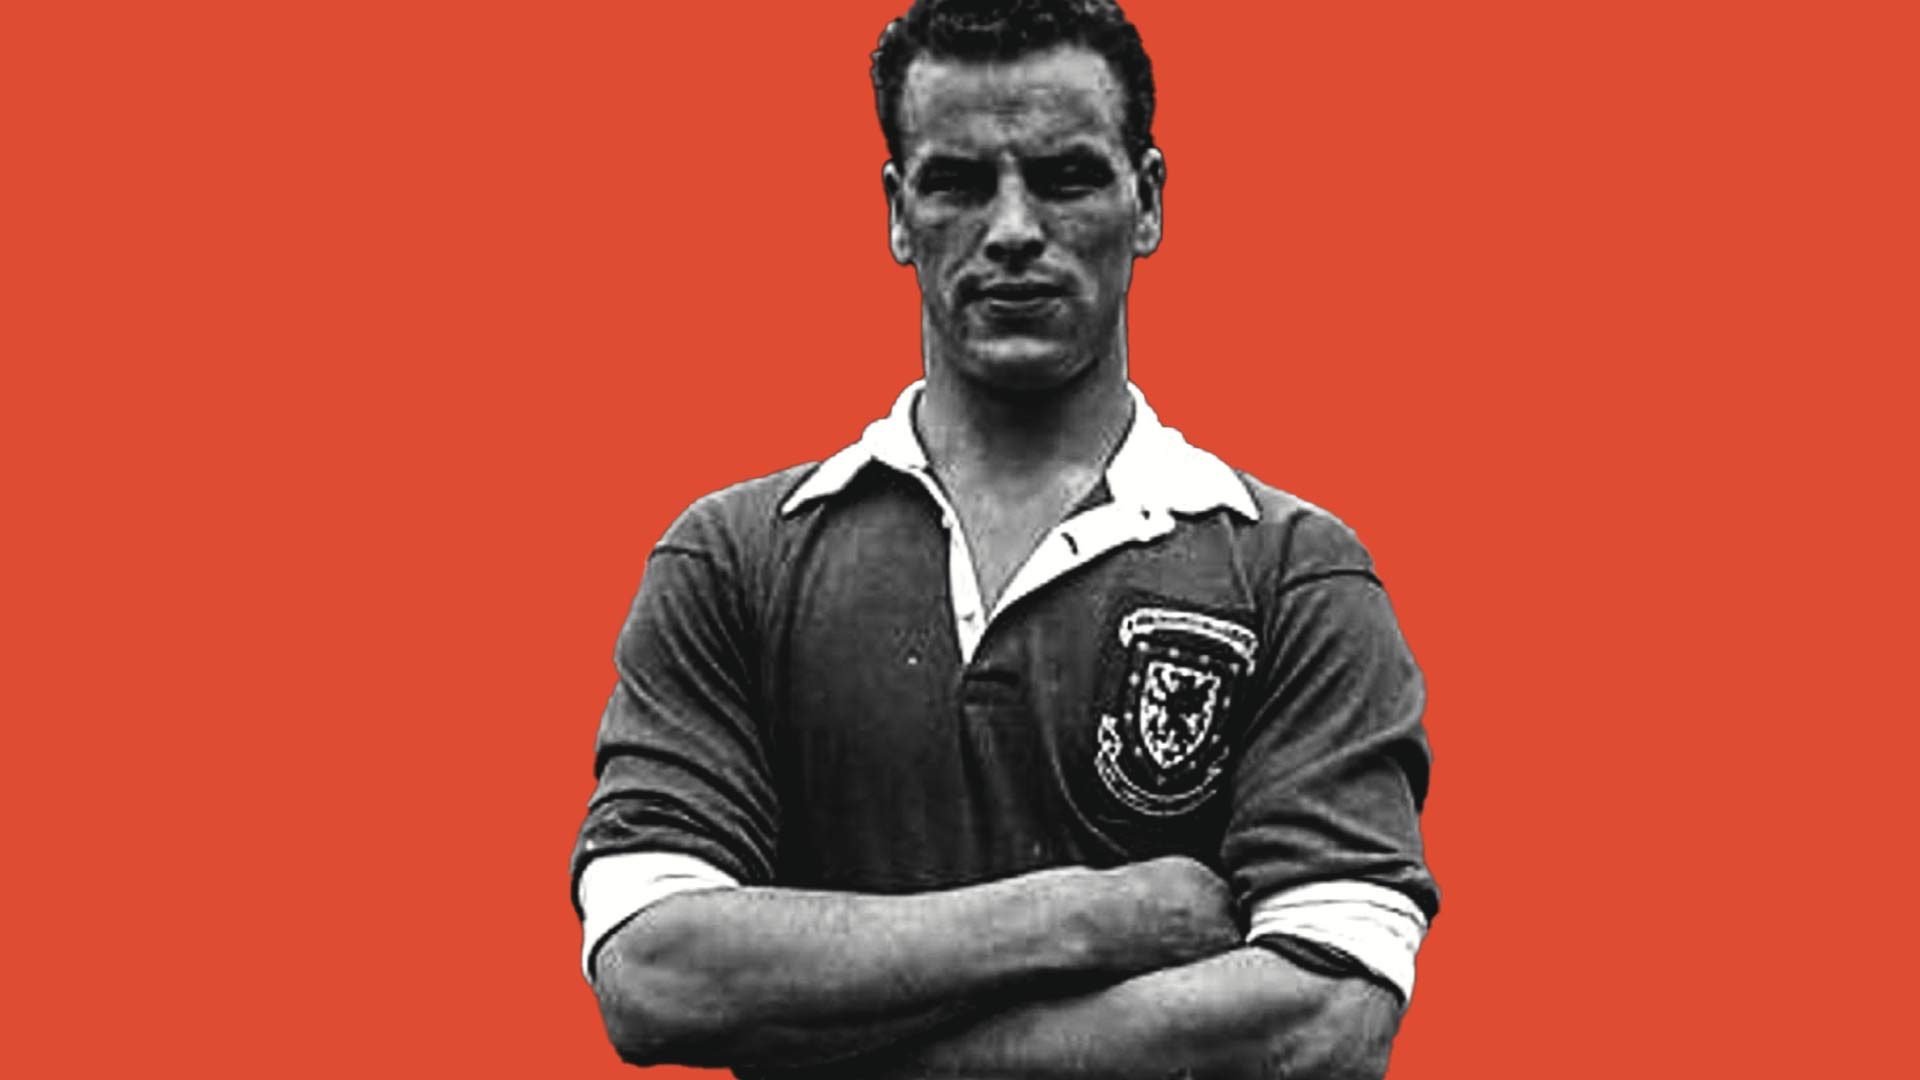 A black and white photo of John Charles with his arms folded in a Wales kit against a red backdrop